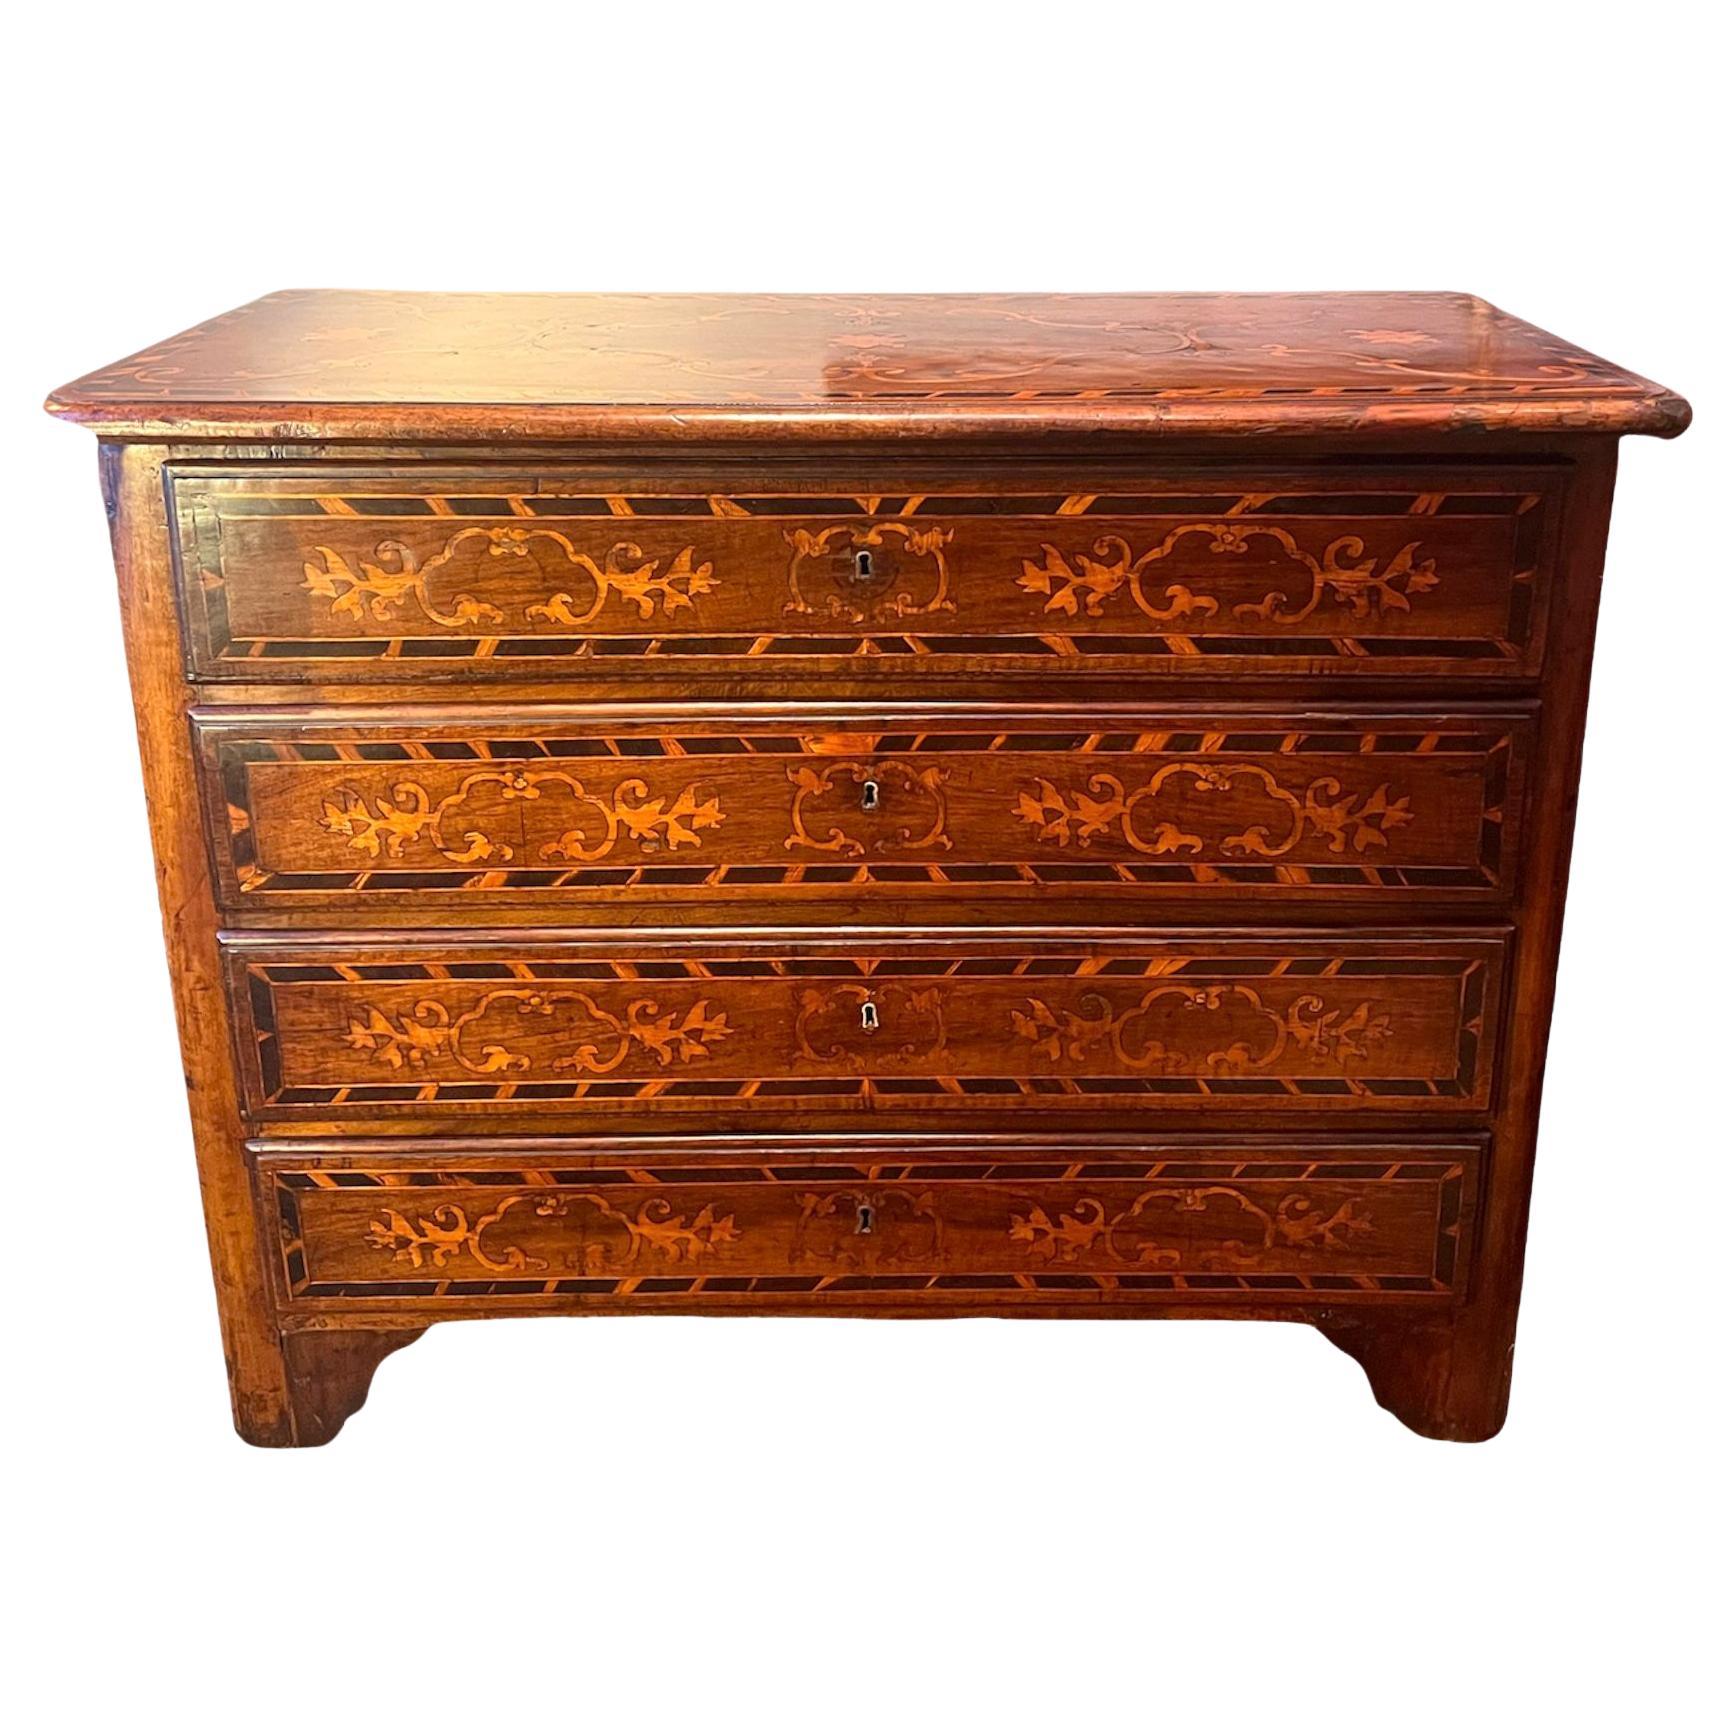  Inlaid solid walnut chest of drawers